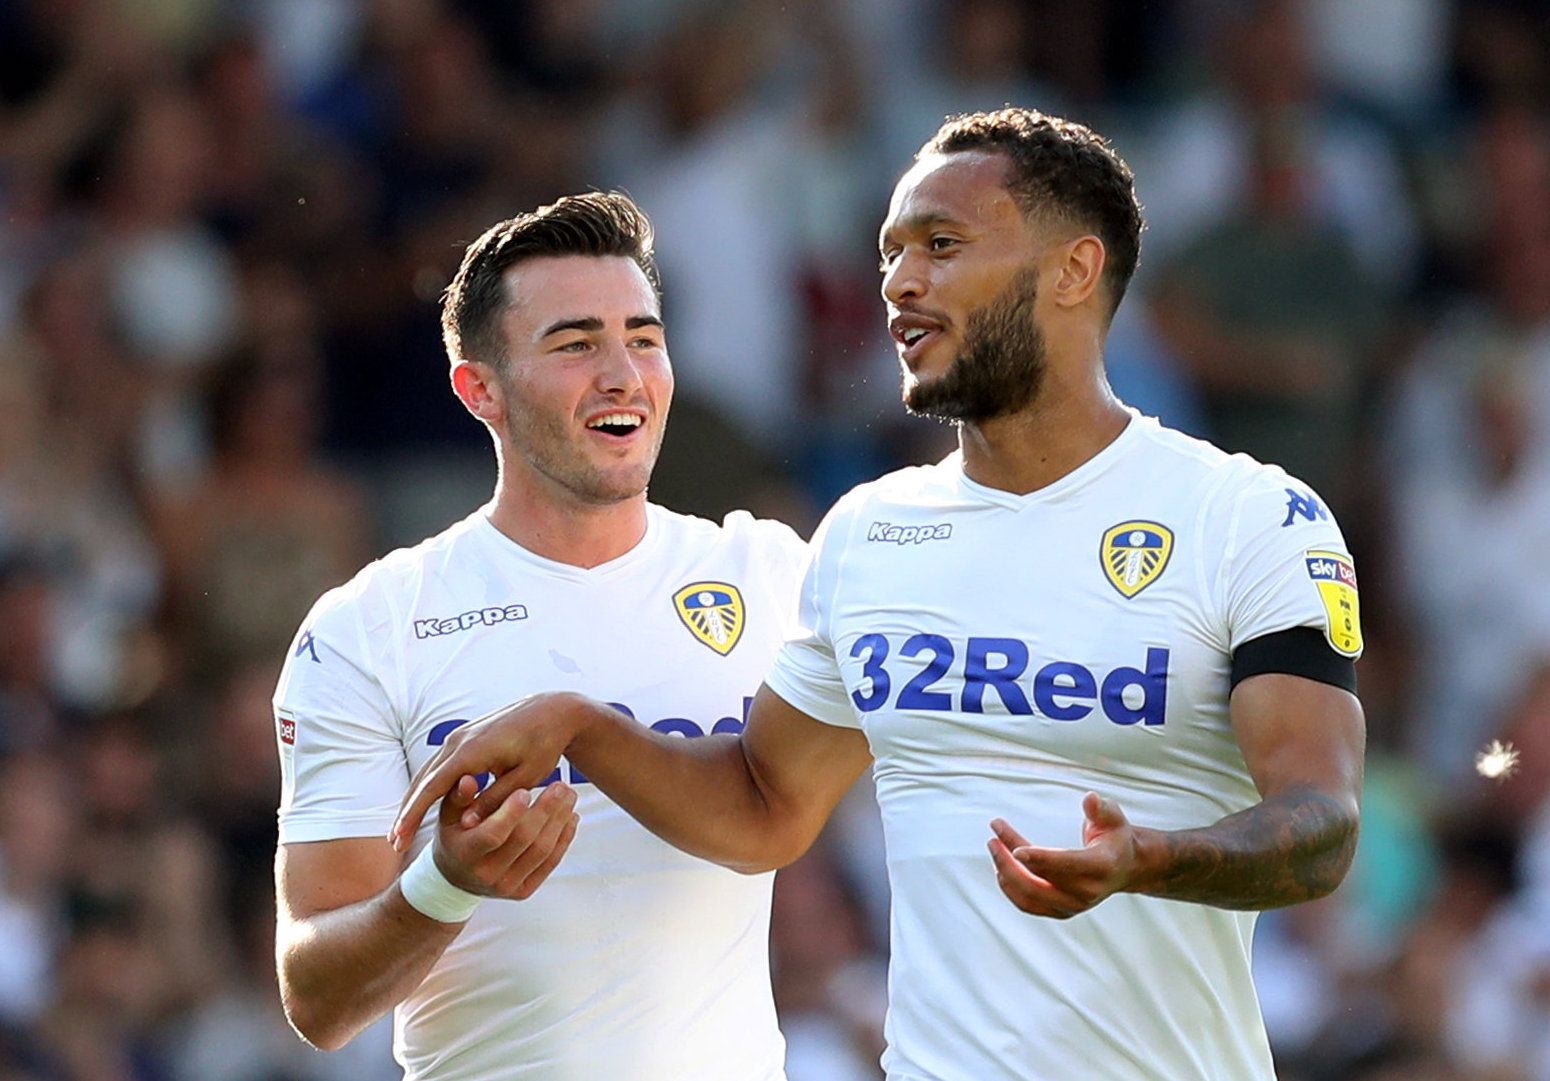 Soccer Football - Championship - Leeds United v Stoke City - Elland Road, Leeds, Britain - August 5, 2018   Leeds United's Jack Harrison and Lewis Baker celebrate at the end of the game   Action Images/John Clifton    EDITORIAL USE ONLY. No use with unauthorized audio, video, data, fixture lists, club/league logos or 